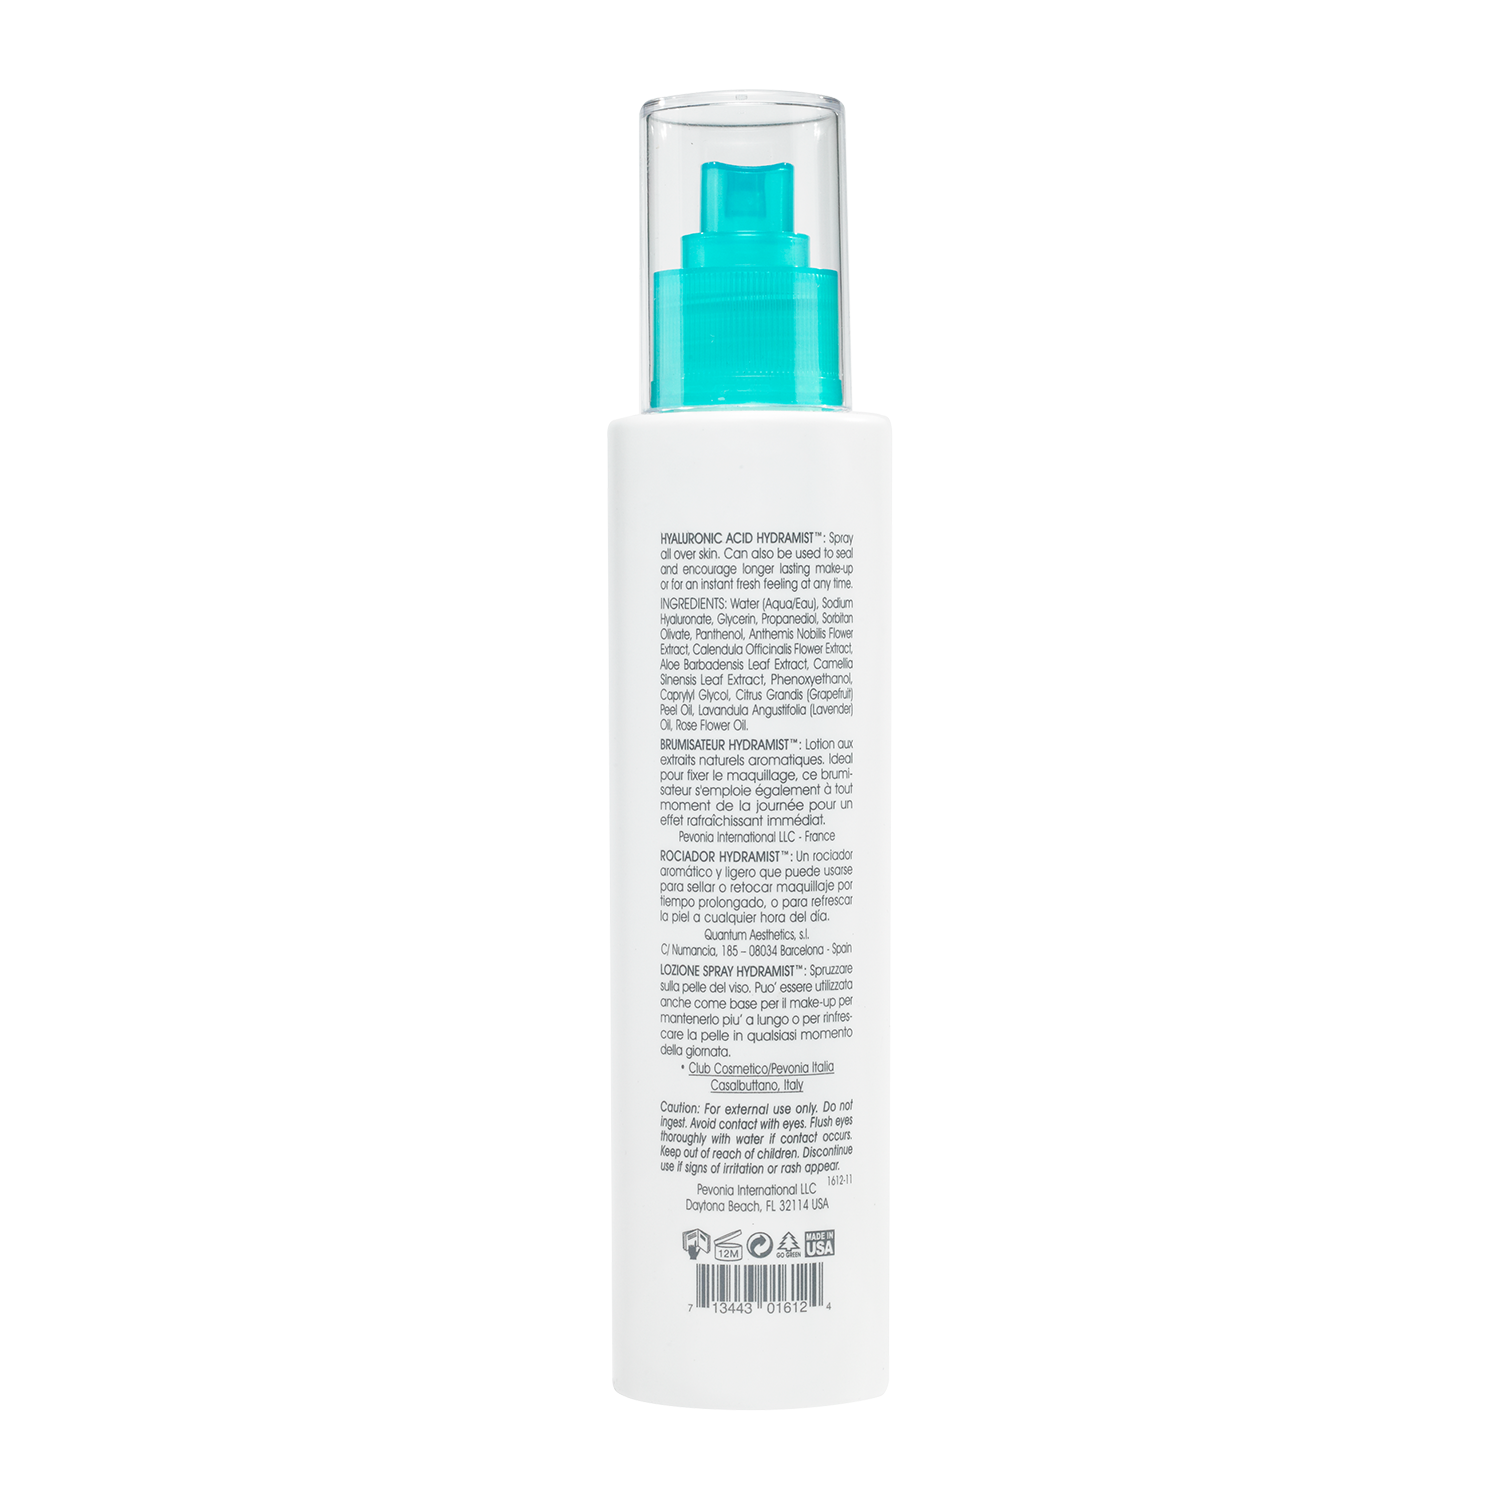 CleanRefresh Foaming Oil Cleanser & Hyaluronic Acid HydraMist Duo - Saving £40 (8080199844118)